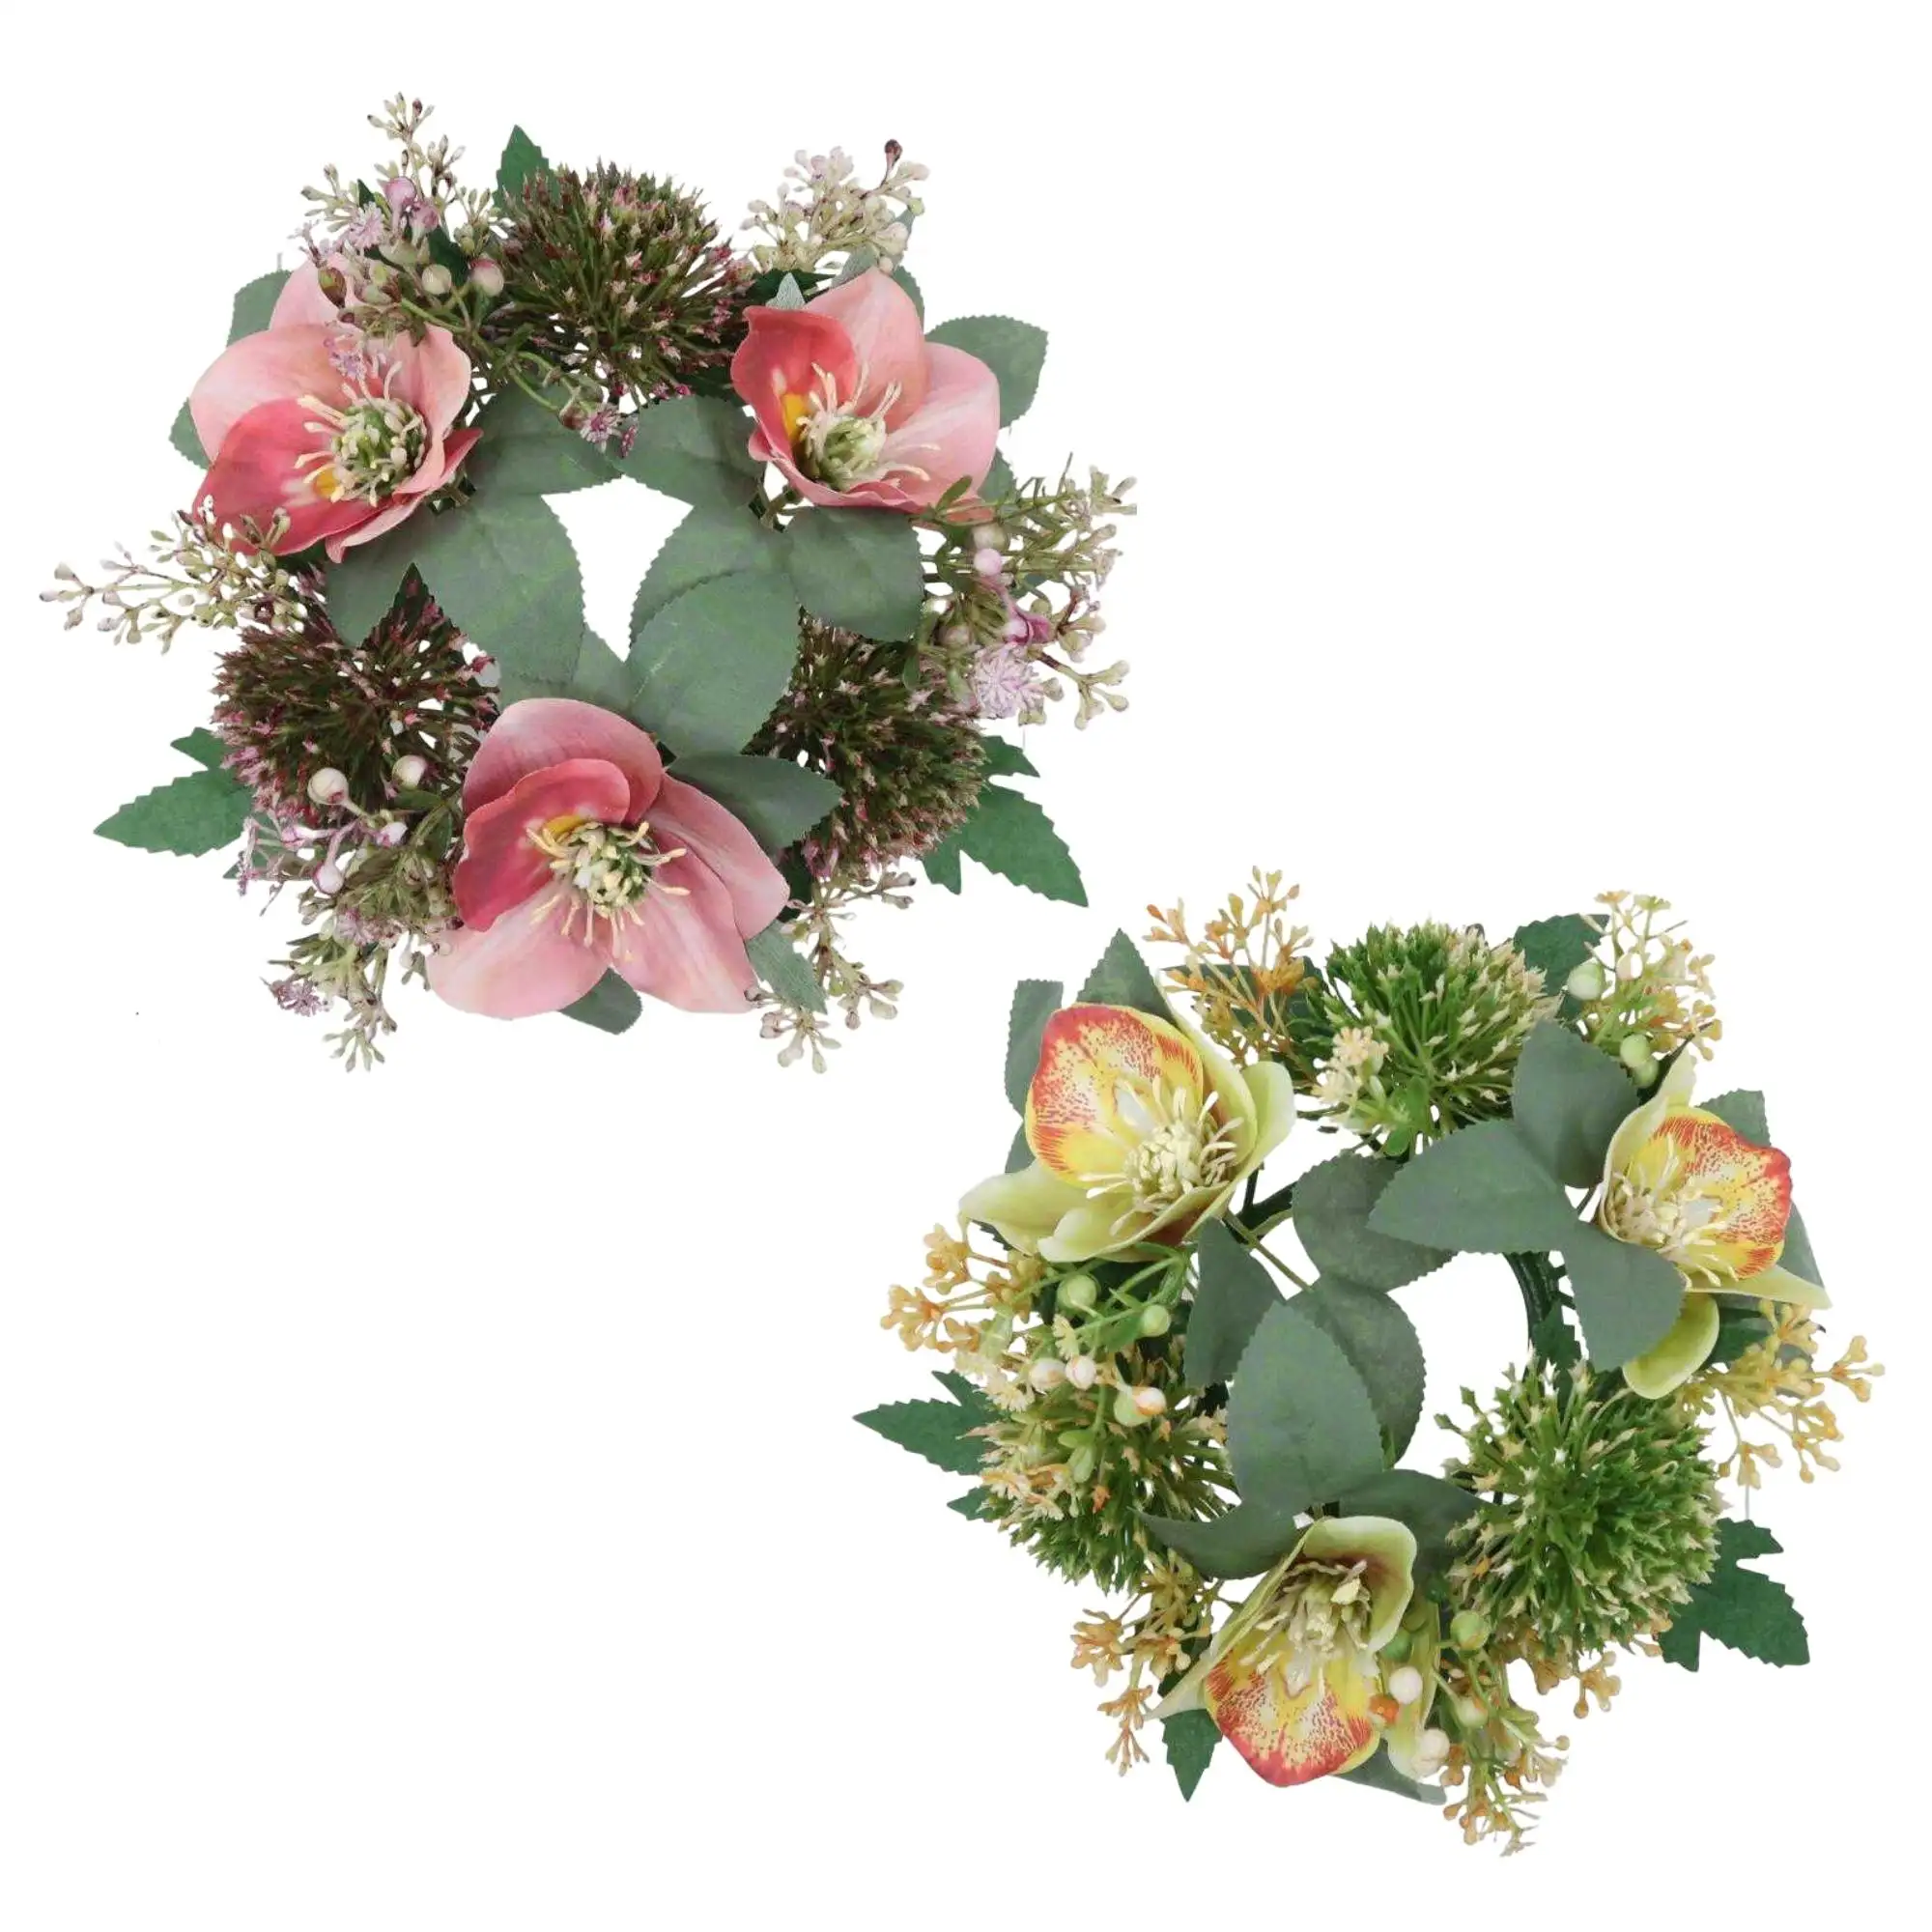 Hot Selling Wedding Decoration Mixed Helleborus With Foliage Aritificial Candle Ring Wreath For Home Decor